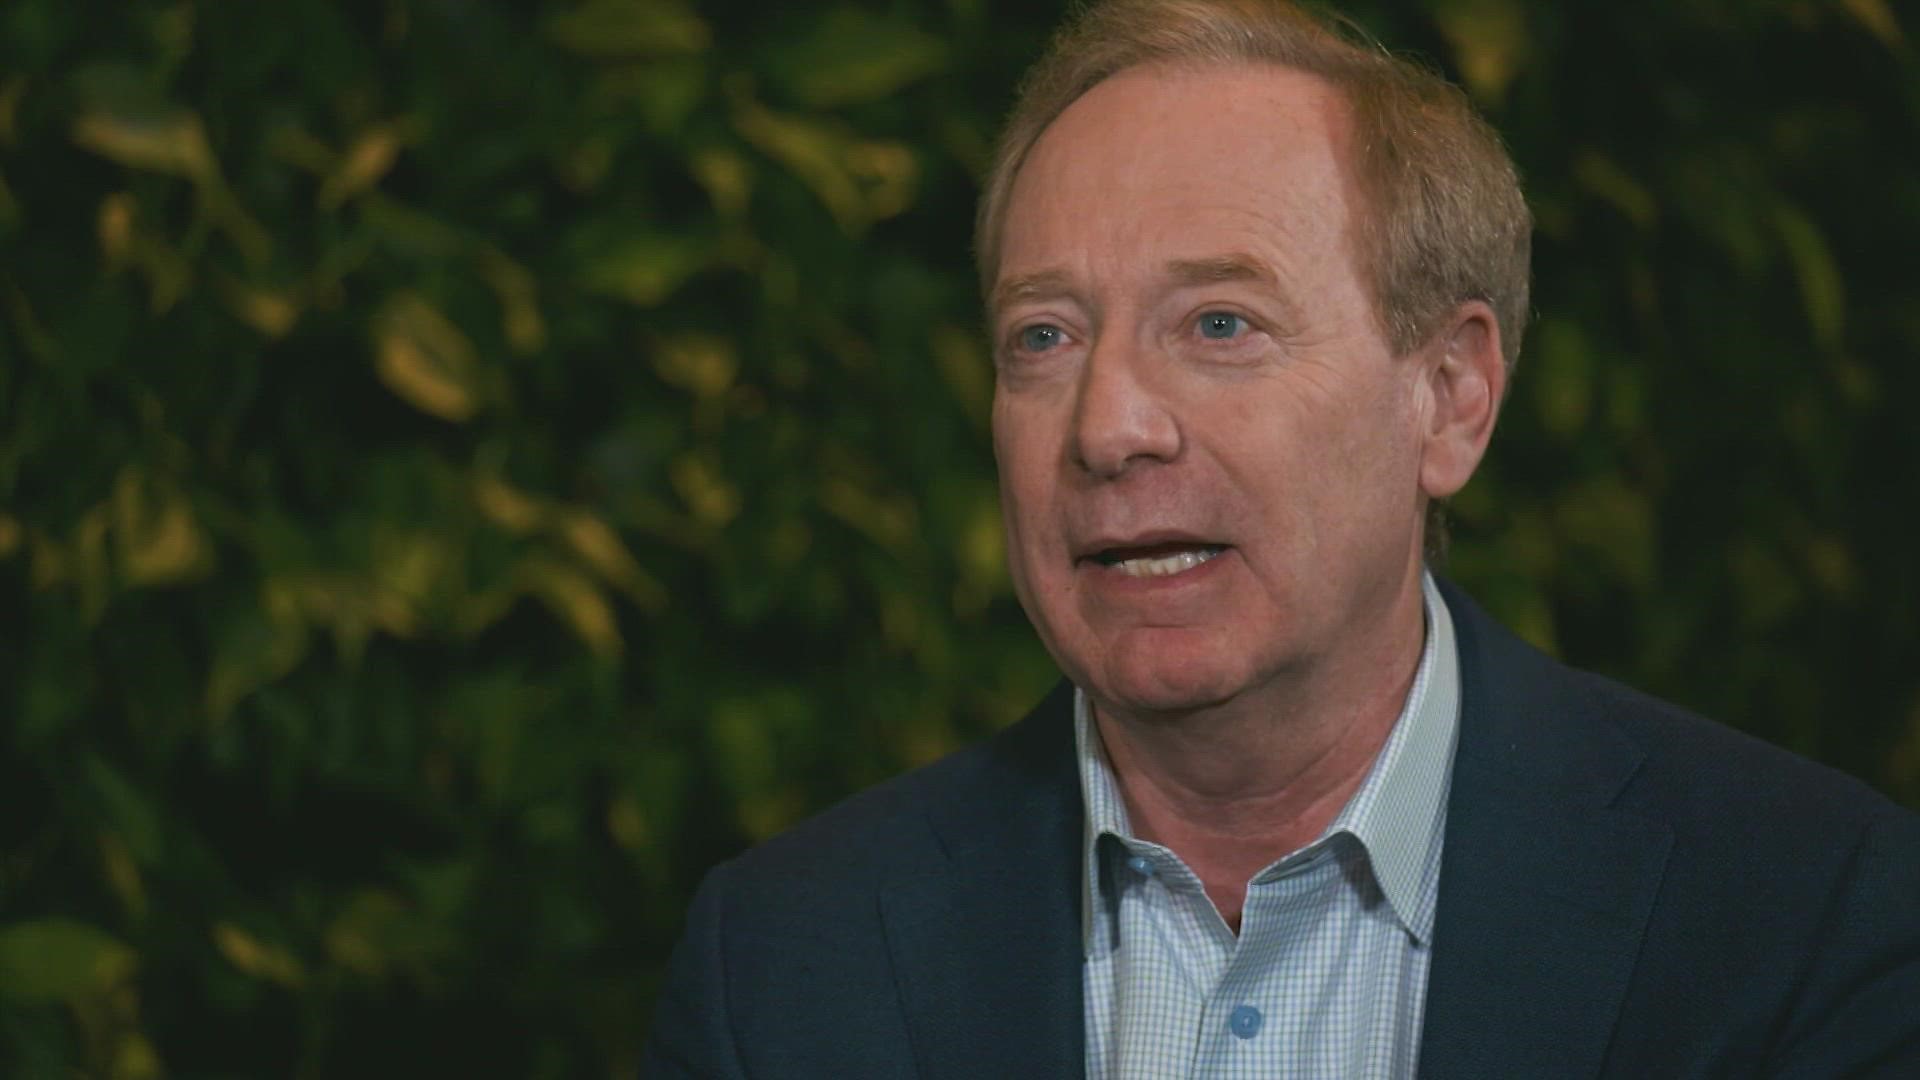 Microsoft president Brad Smith says the company detected Russian cyber aggression against Ukraine before the actual physical attack began